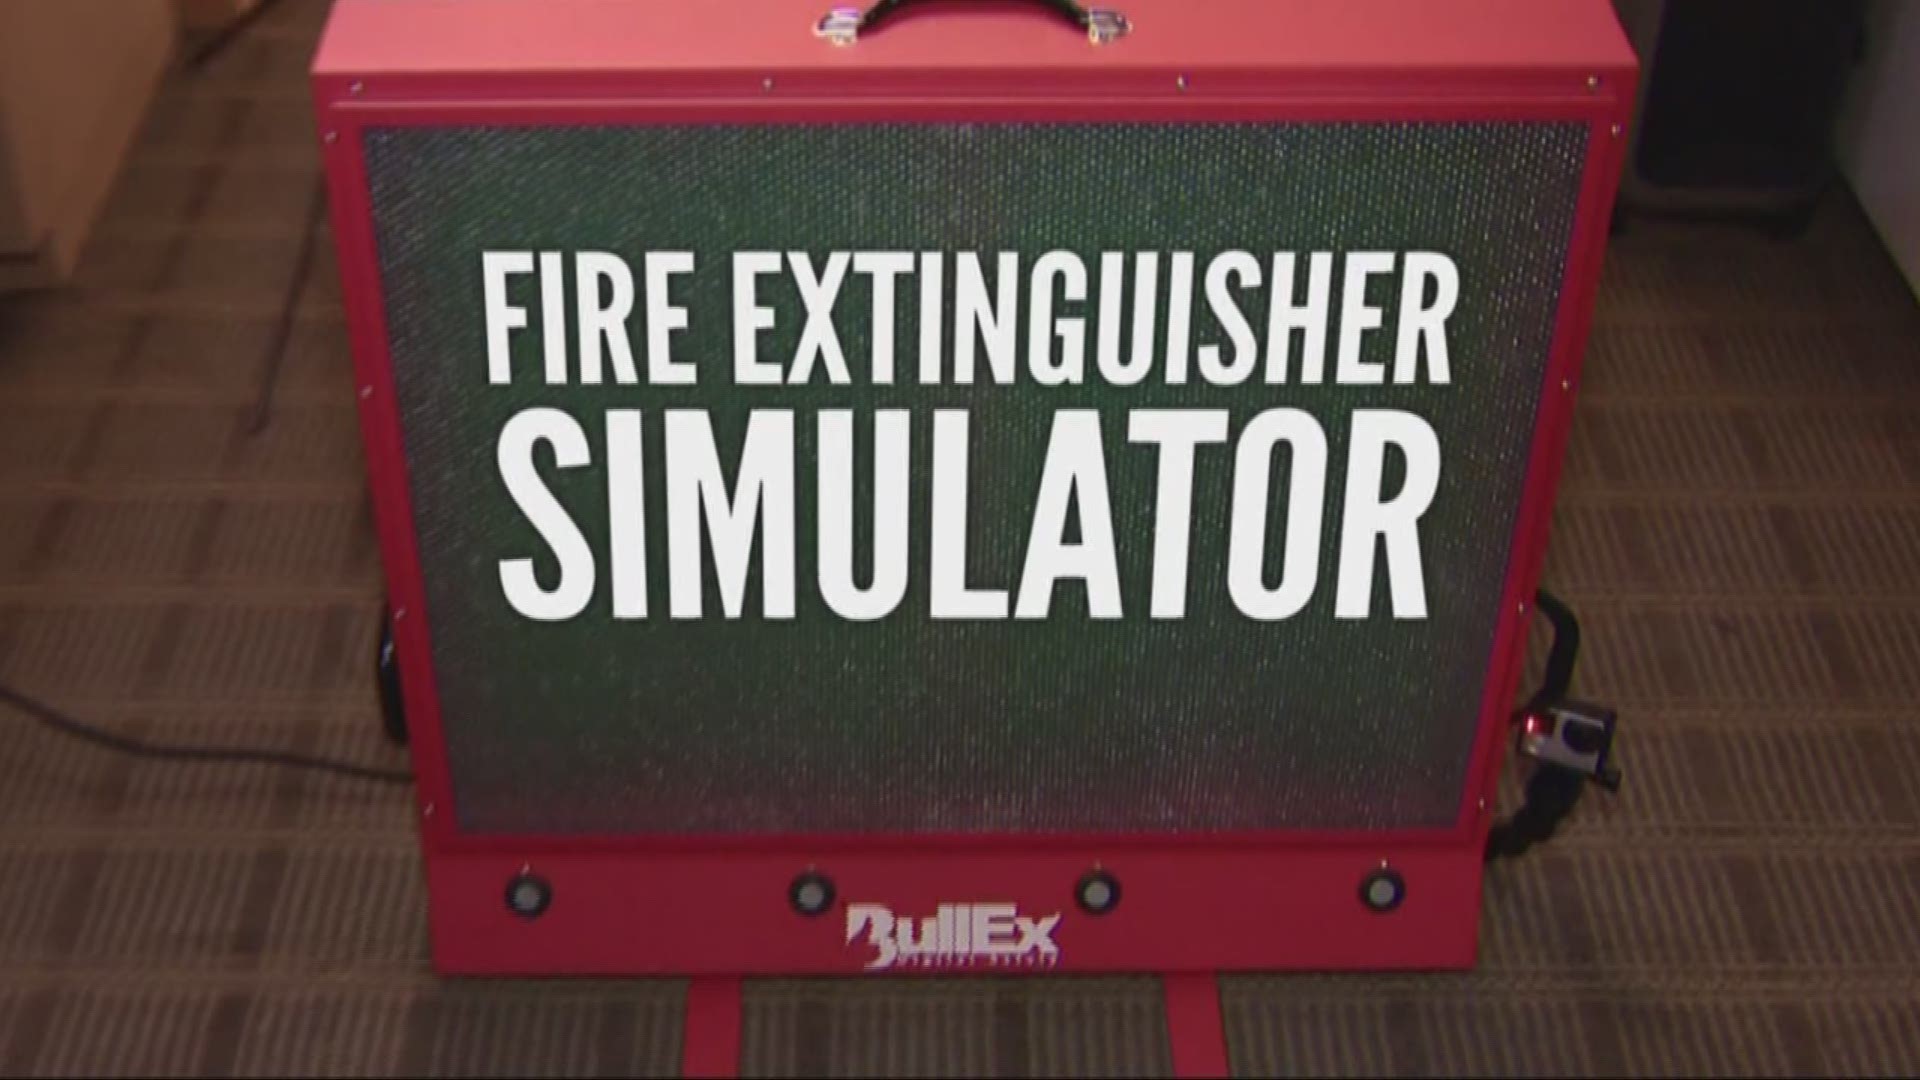 A fire extinguisher is something you probably have in your home. It could save your life and your family. But do you know how to use it?